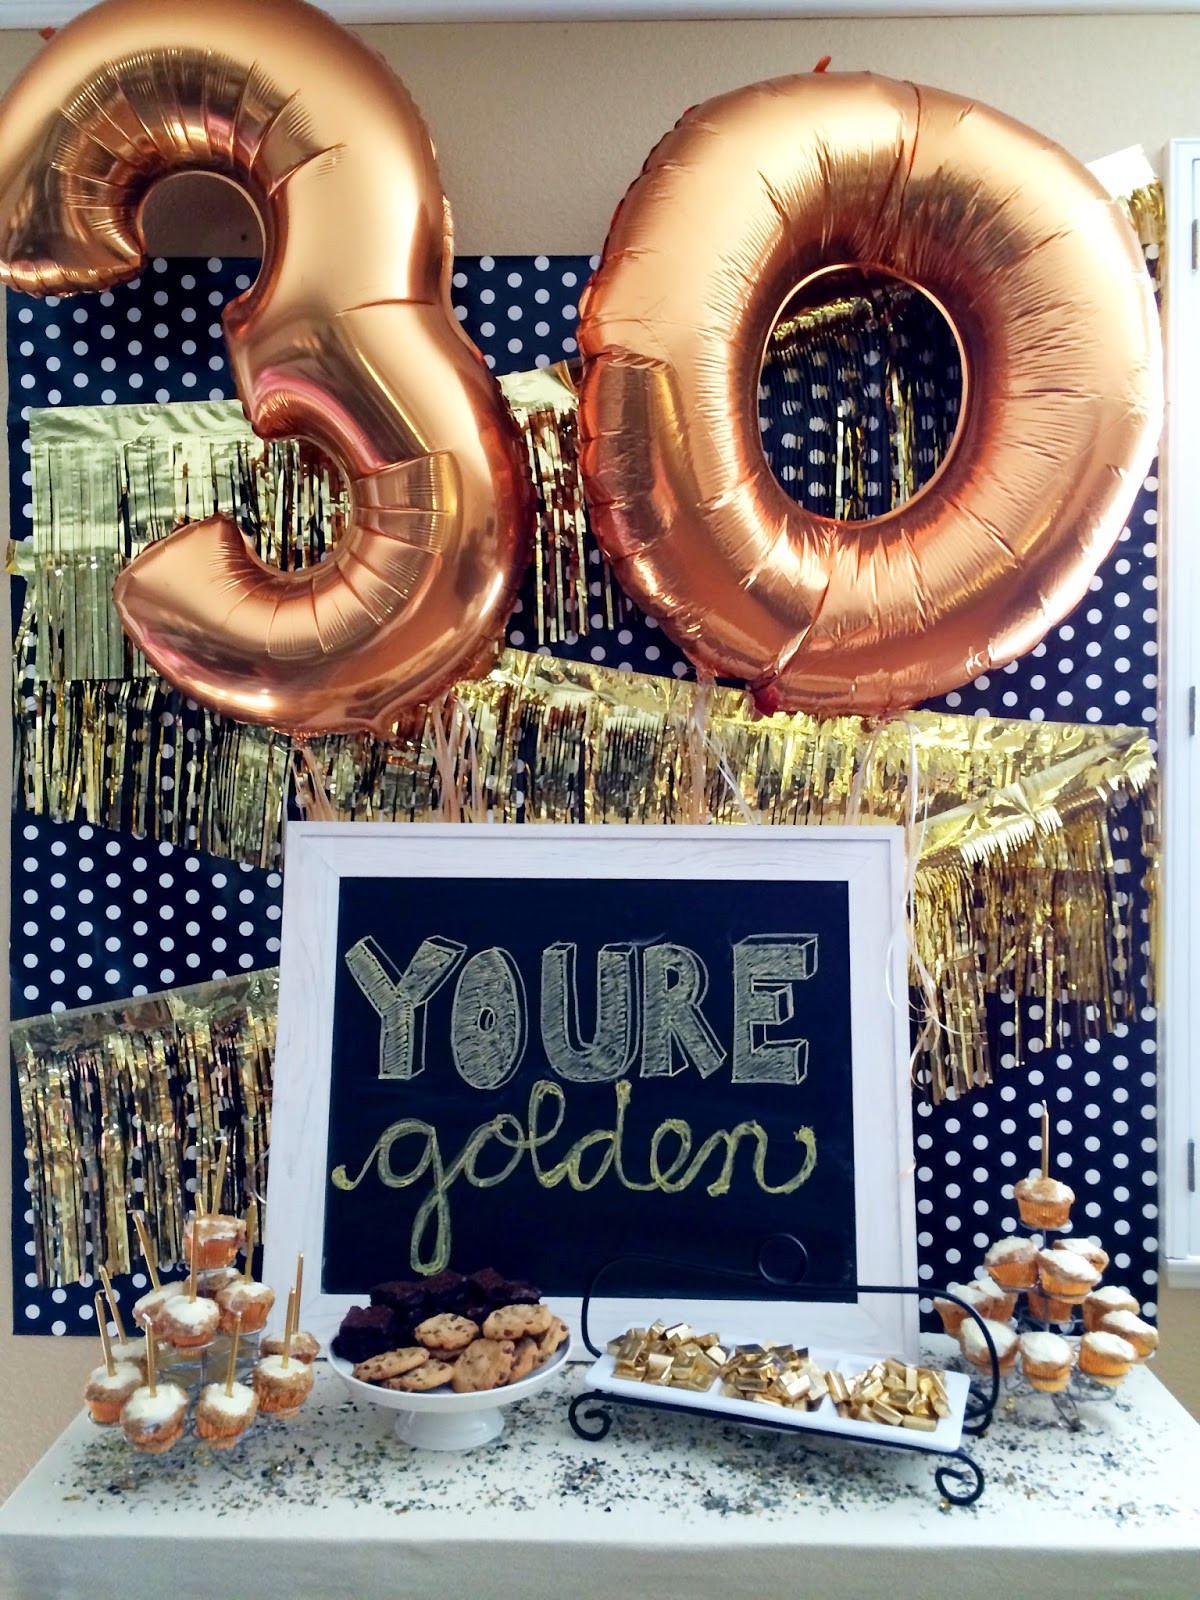 30 Year Birthday Party Ideas
 7 Clever Themes for a Smashing 30th Birthday Party